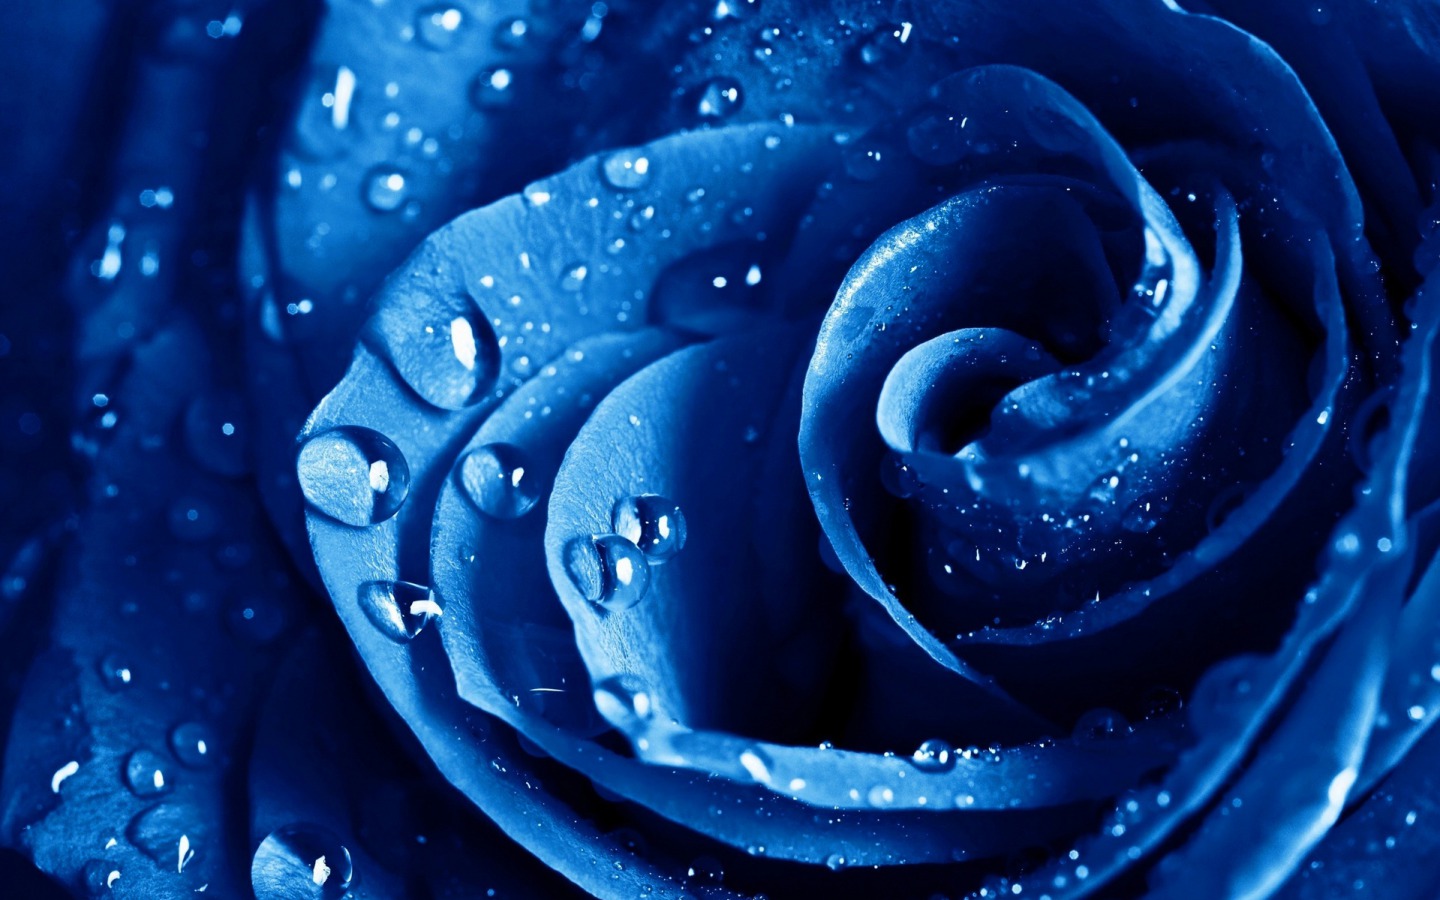 Flowers Image Blue Rose HD Wallpaper And Background Photos